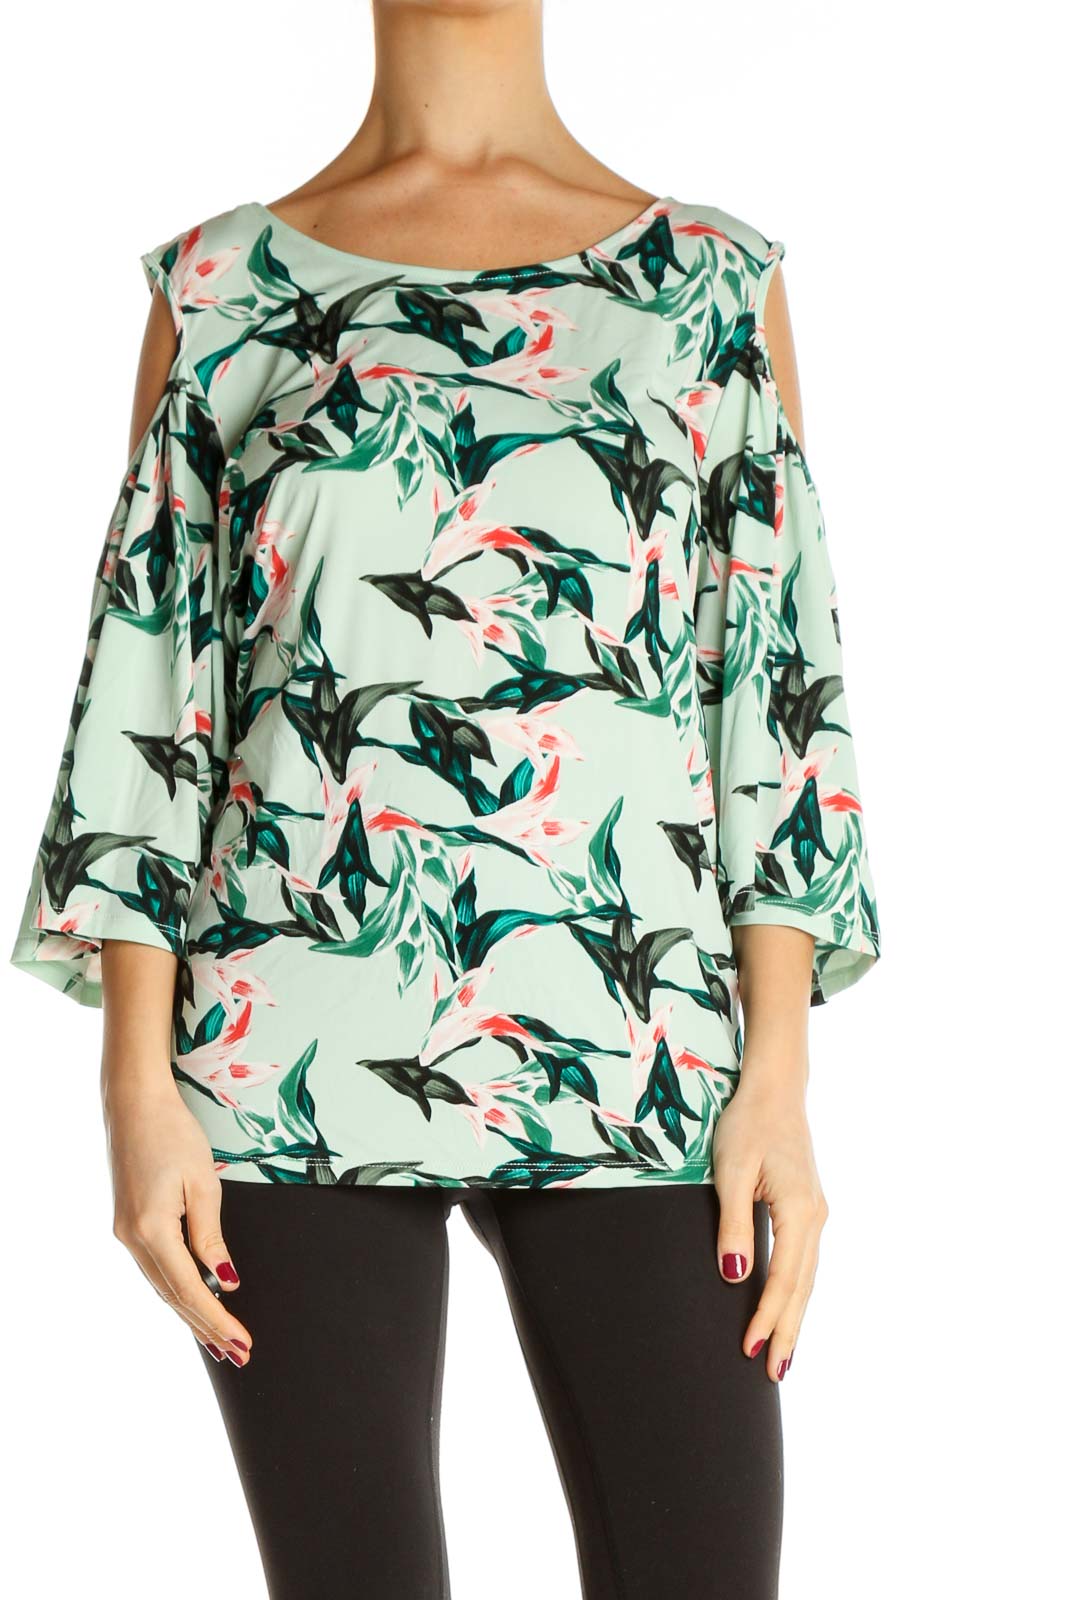 Green Tropical Print All Day Wear Blouse Front